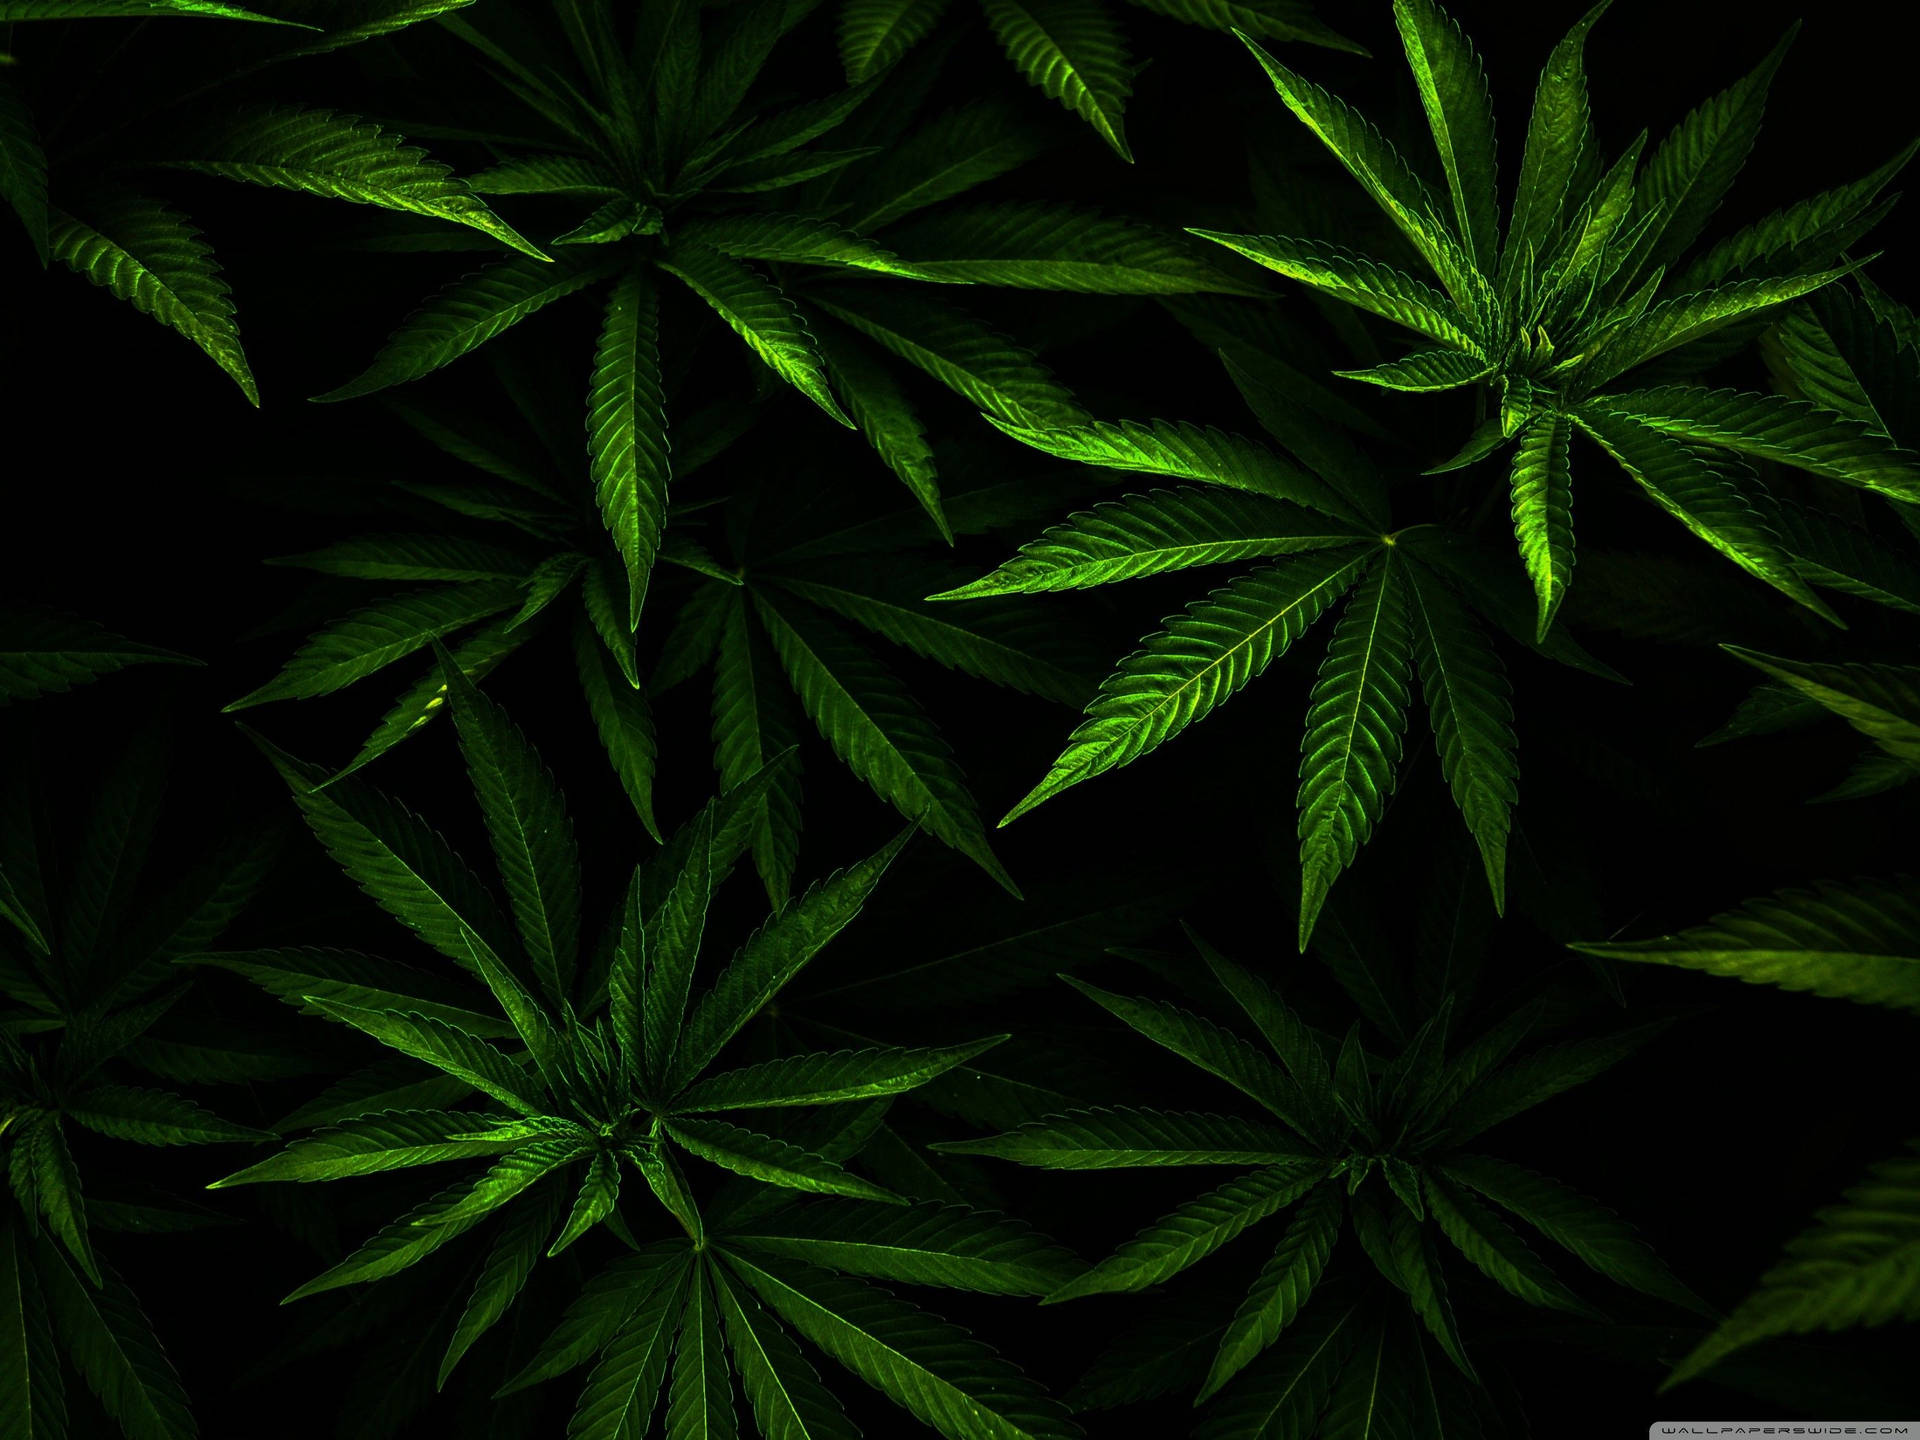 Free Weed Wallpaper Downloads, [200+] Weed Wallpapers for FREE | Wallpapers .com